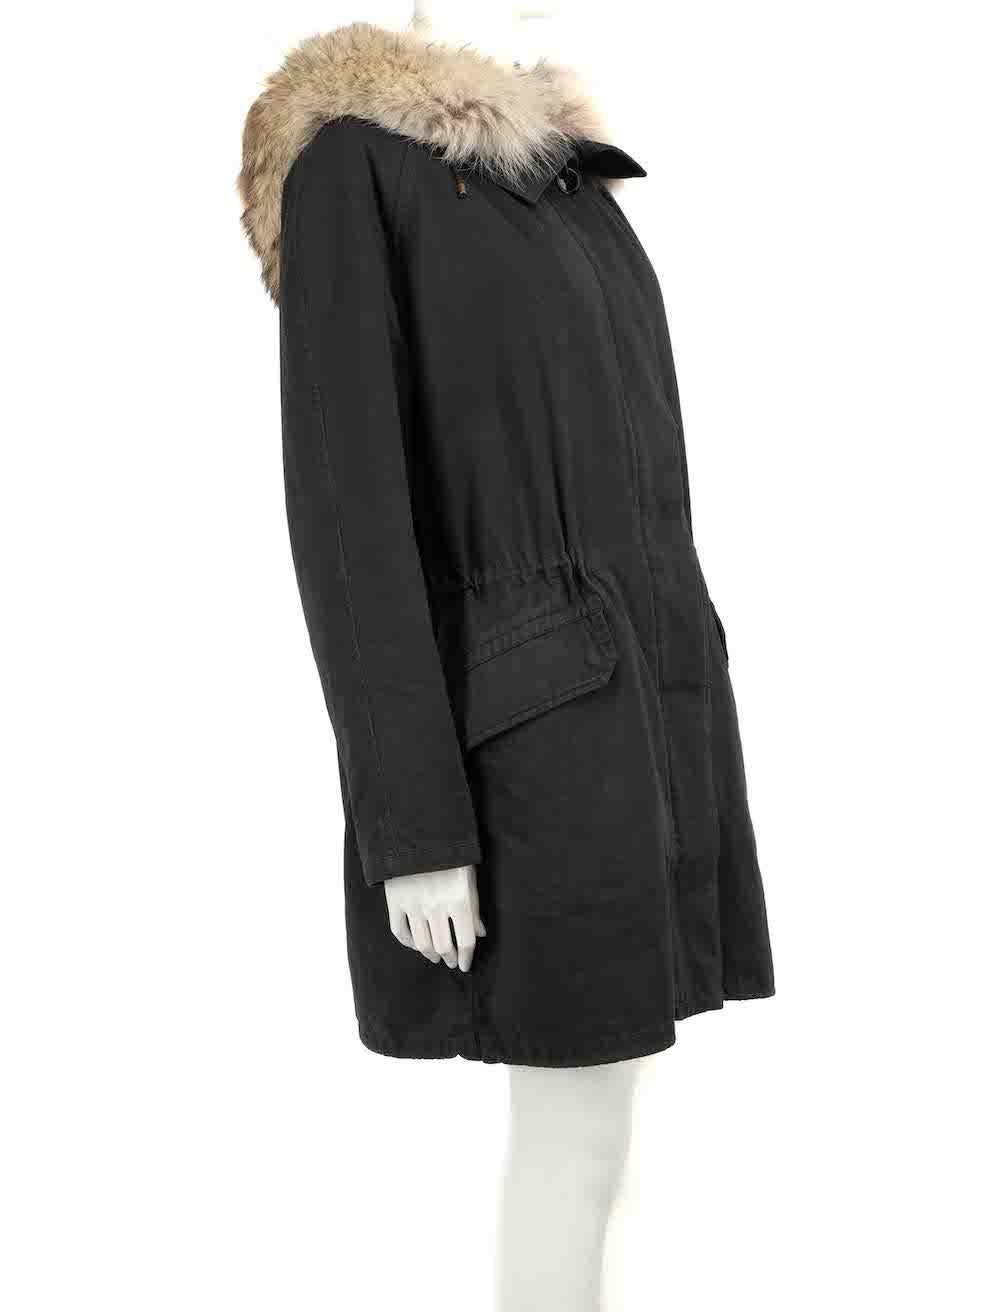 CONDITION is Very good. Hardly any visible wear to coat is evident. Loose top button seen on this used Yves Salomon designer resale item.
 
Details
Black
Cotton
Parka coat
Front double zip closure with buttons
2x Front side pockets with snap